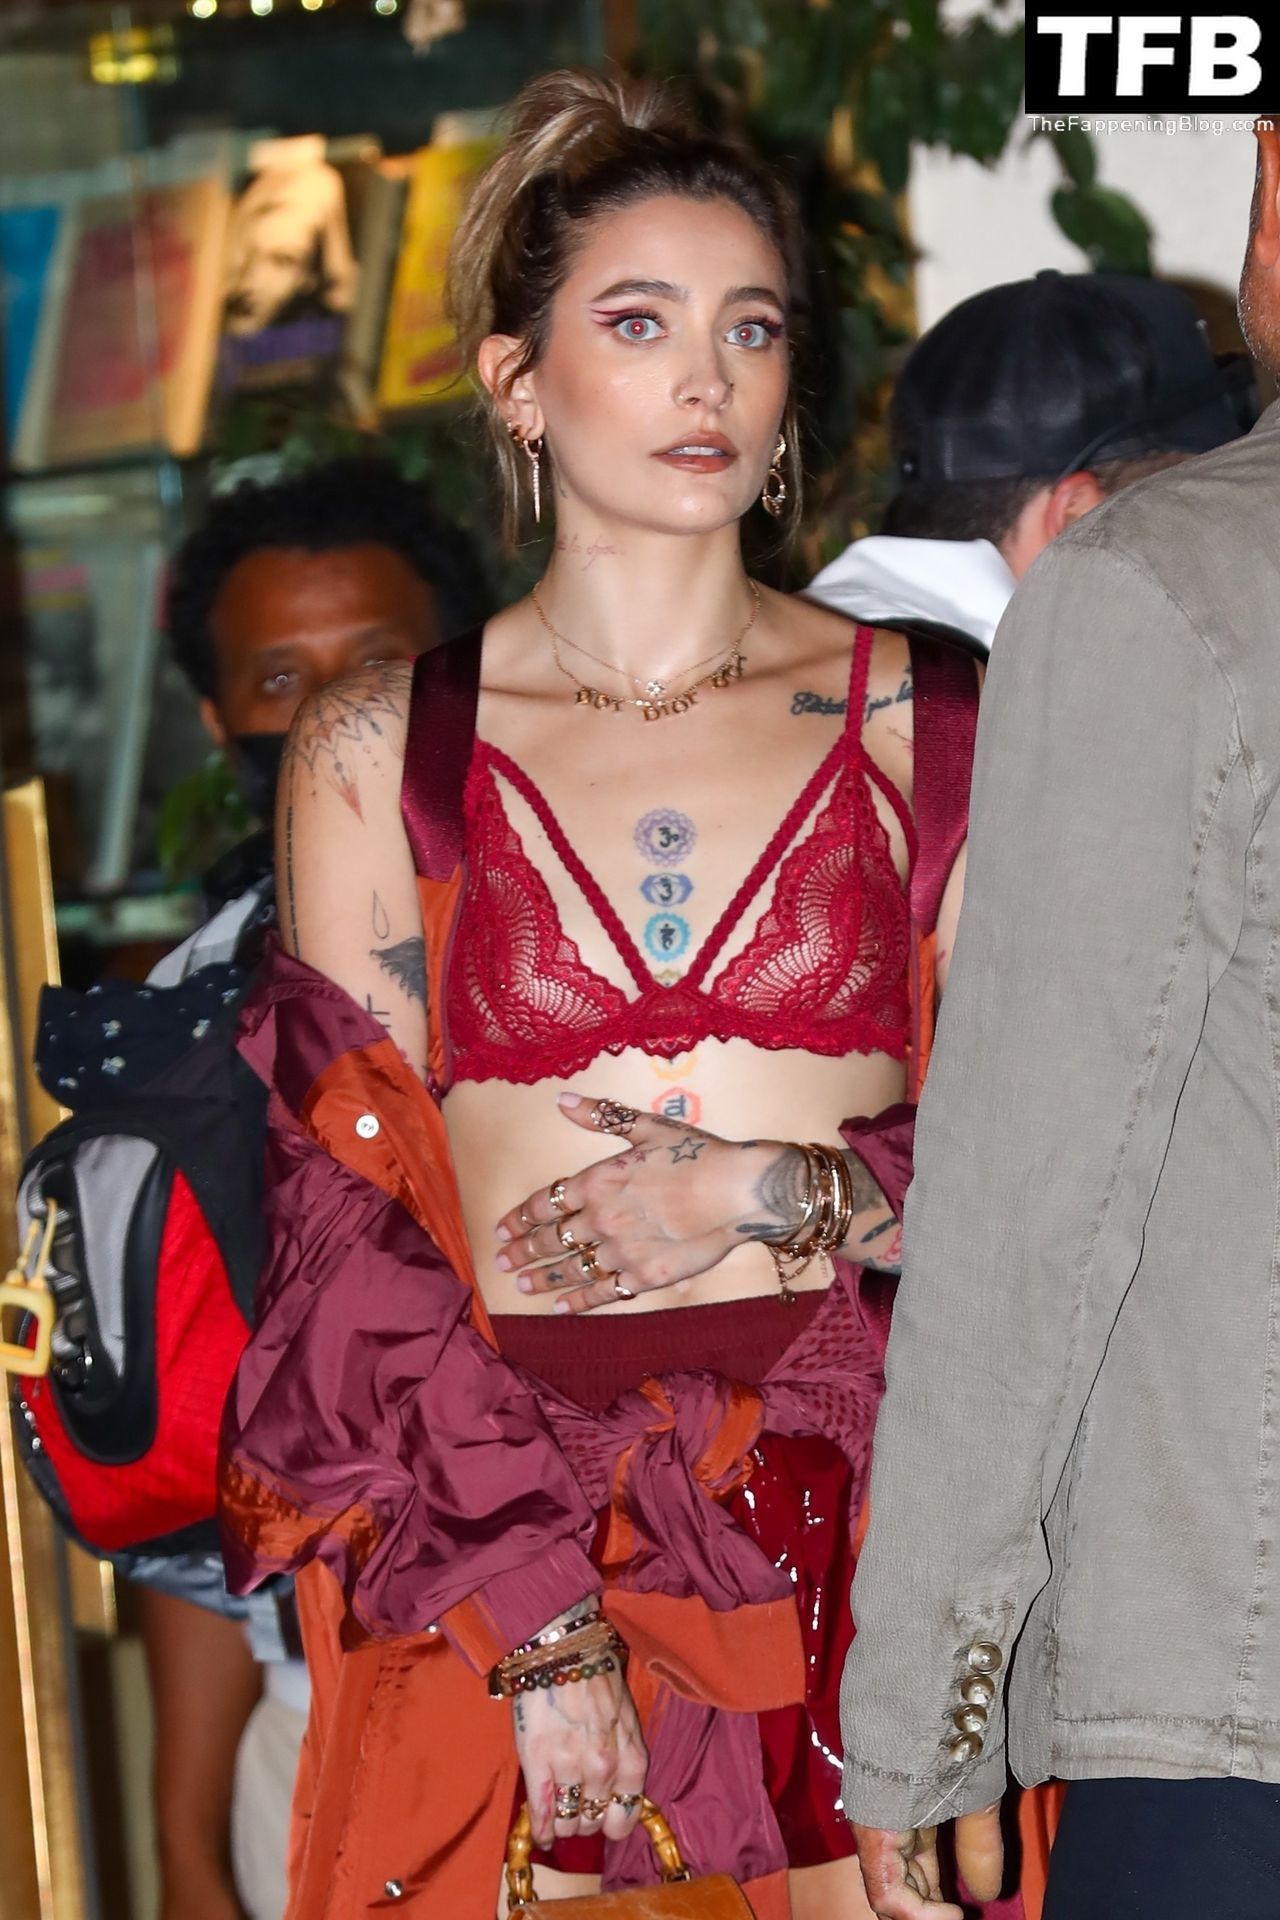 Paris Jackson See Through Nudity The Fappening Blog 1 - Paris Jackson Flashes Her Nude Tits Wearing a See-Through Bra in WeHo (34 Photos)